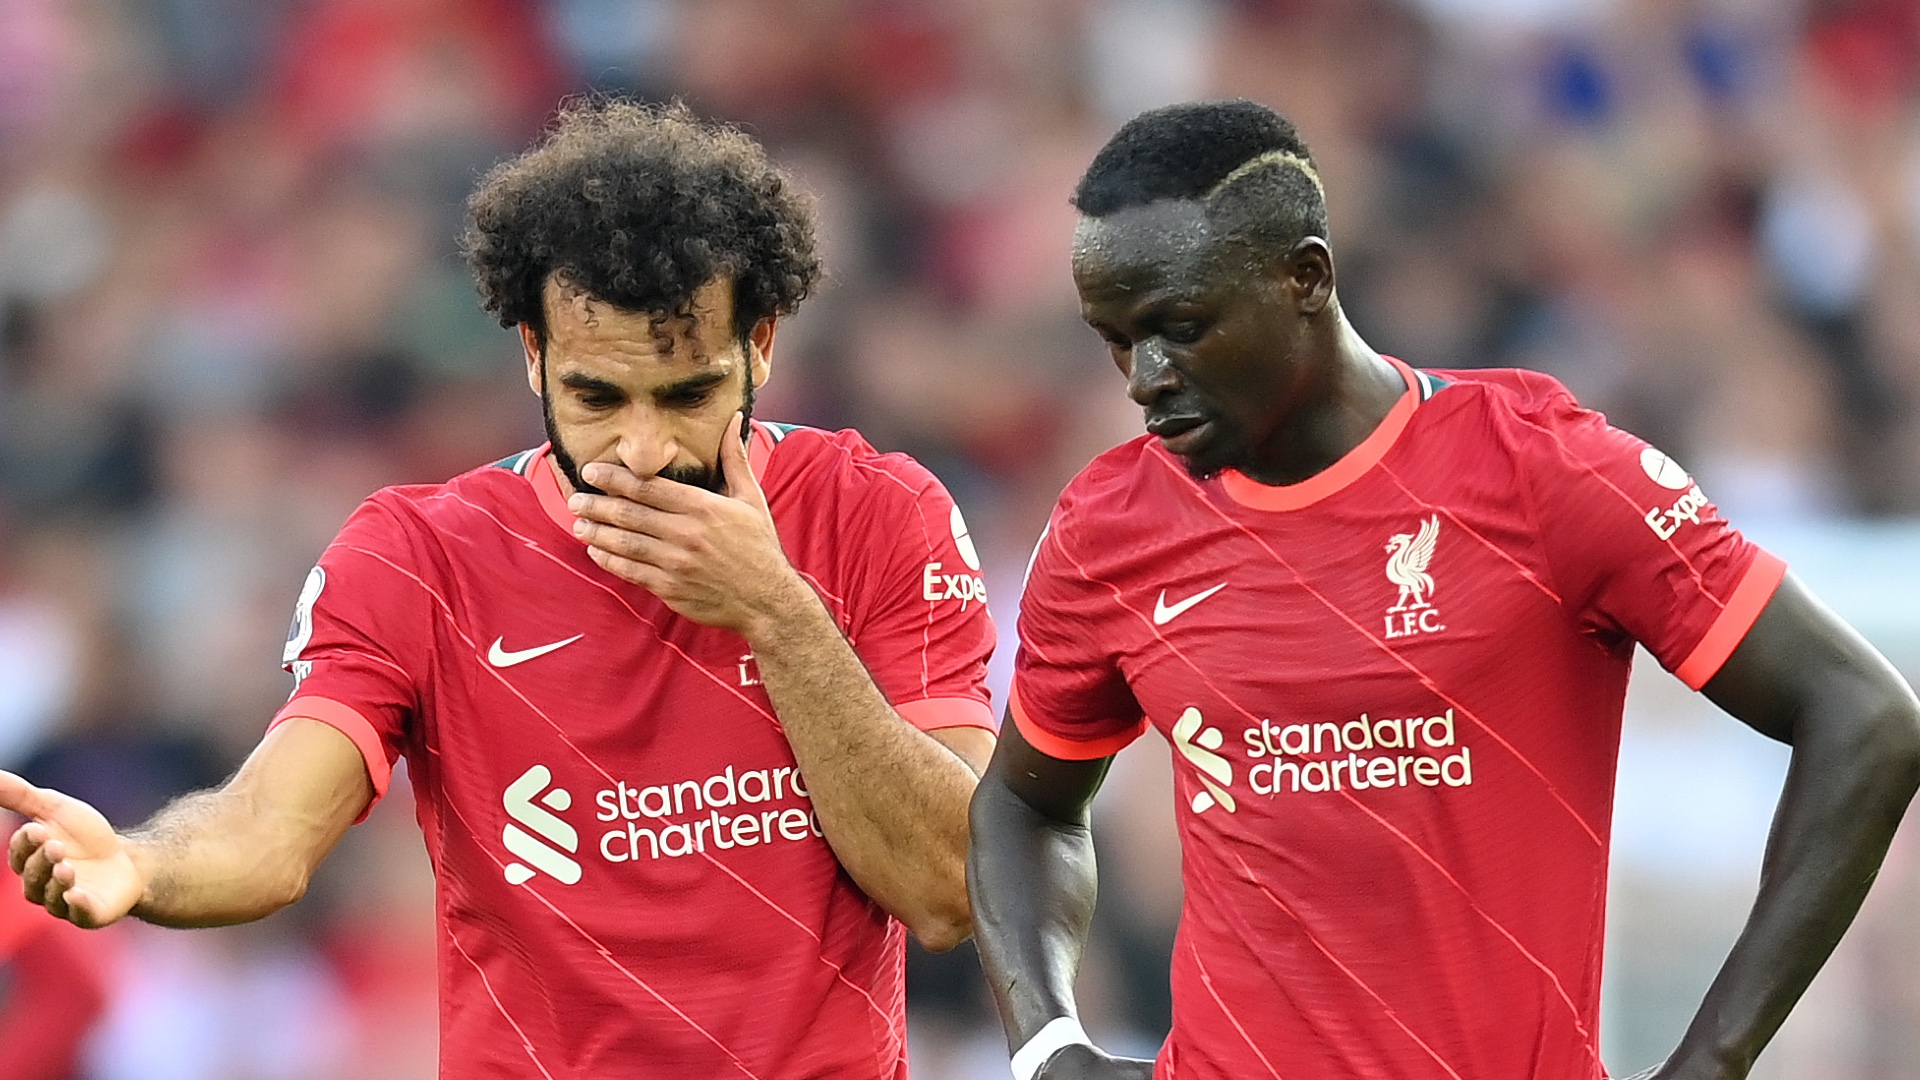 Salah vs Mane: What could Liverpool duo's World Cup play-off mean for Klopp? | Goal.com